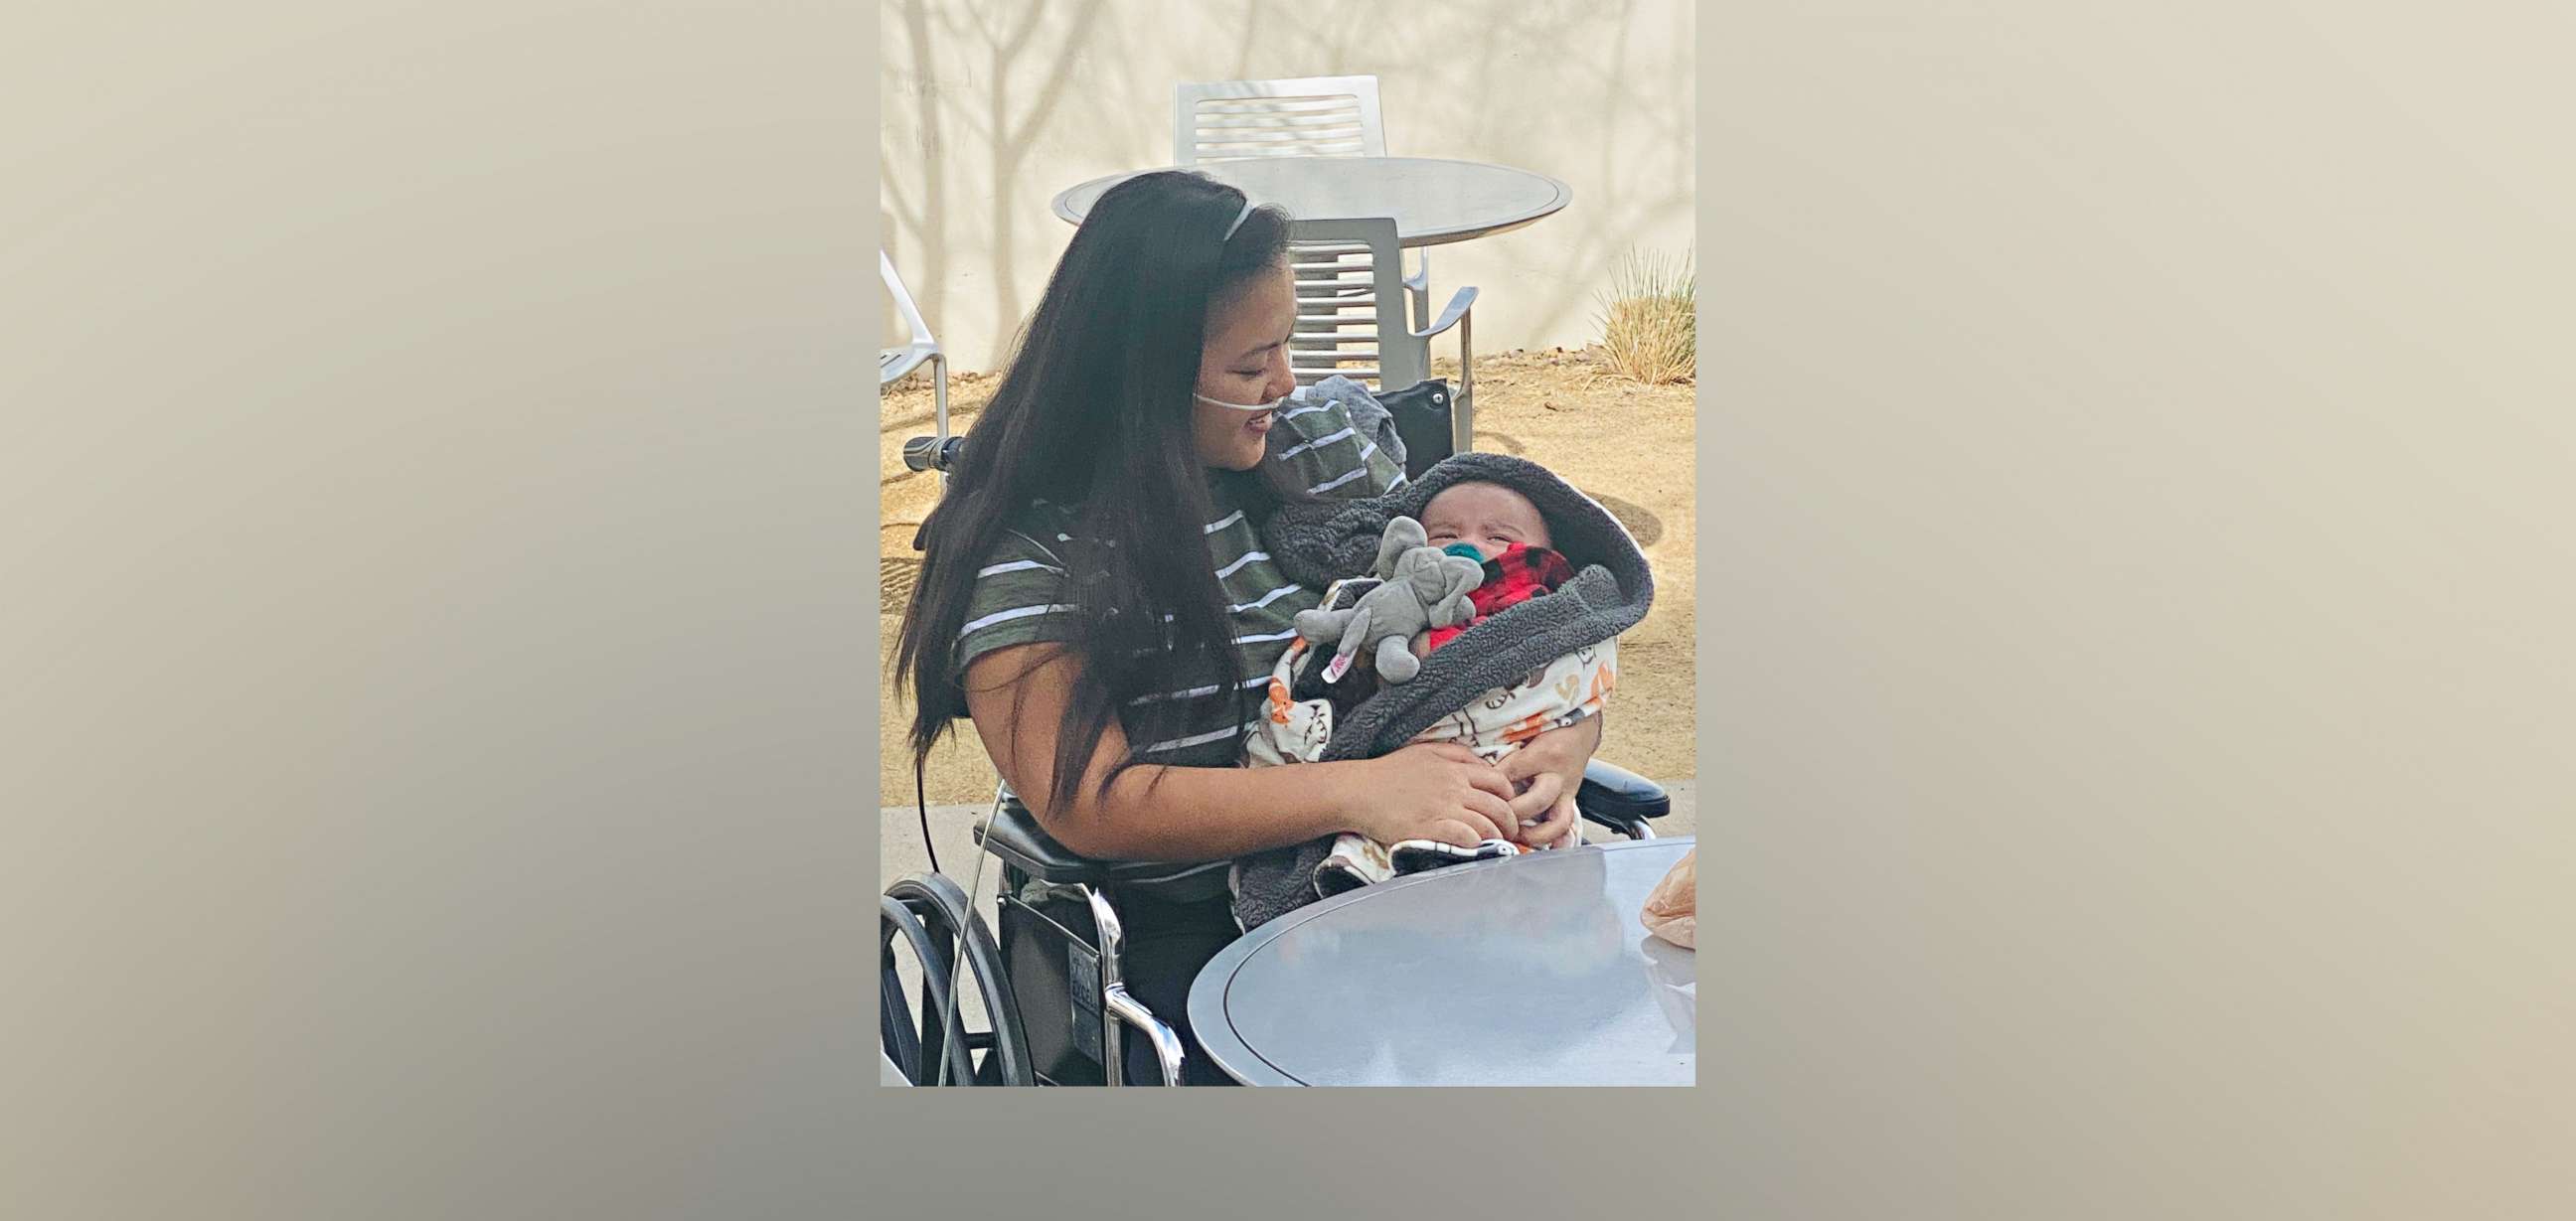 PHOTO: Rowena Salas, 32, meets her son Oliver for the first time, 98 days after his birth, on March 3, 2022, at Sunrise Hospital in Las Vegas.